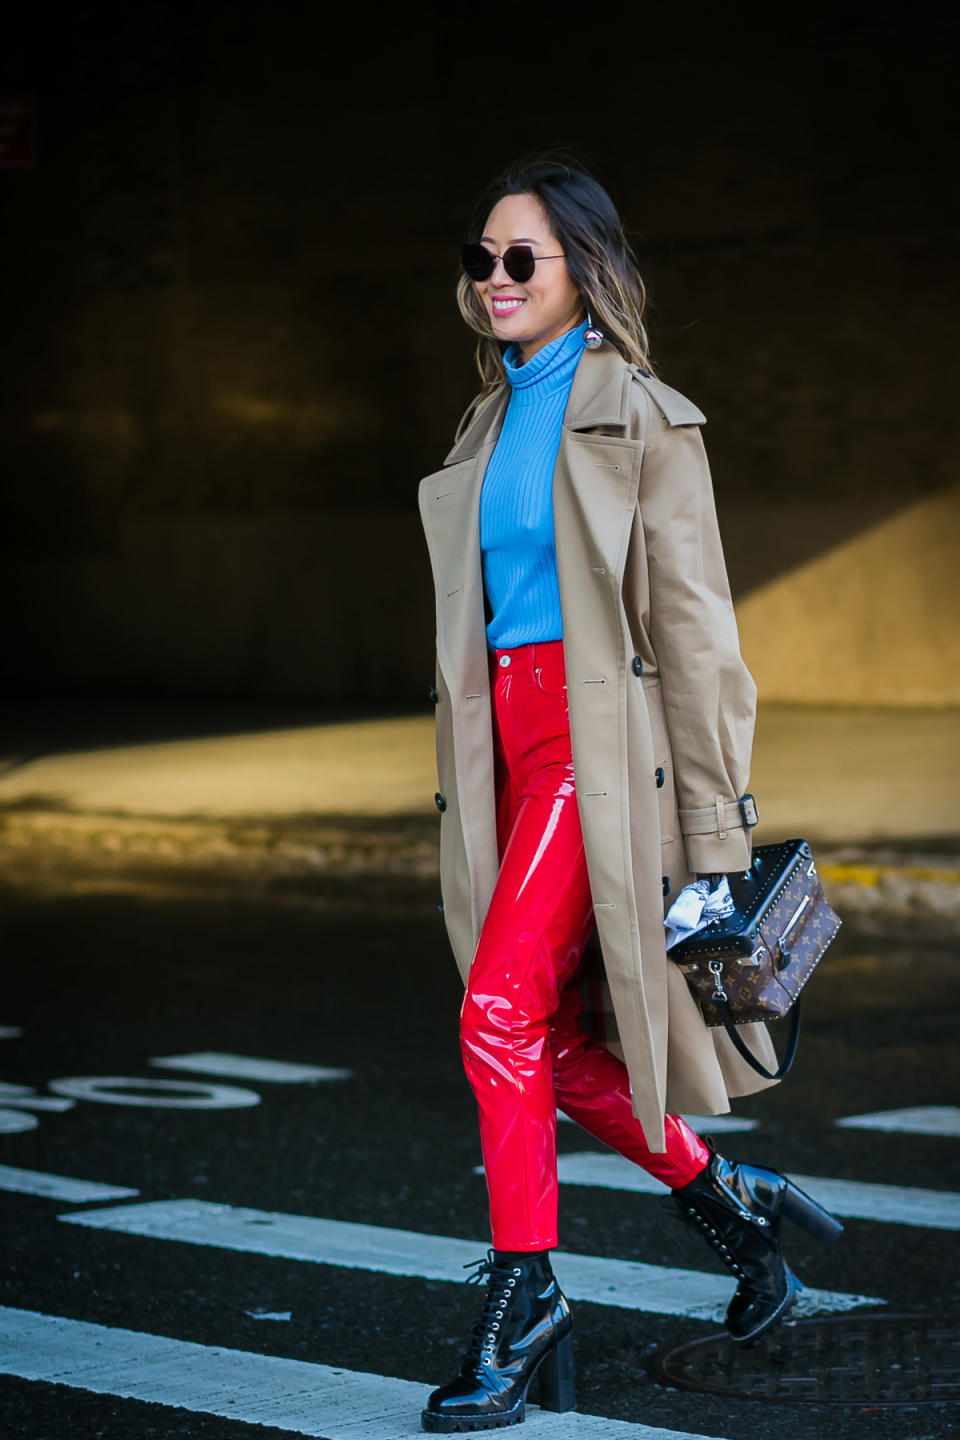 Aimee Song attends New York Fashion Week in vibrant red and blue.